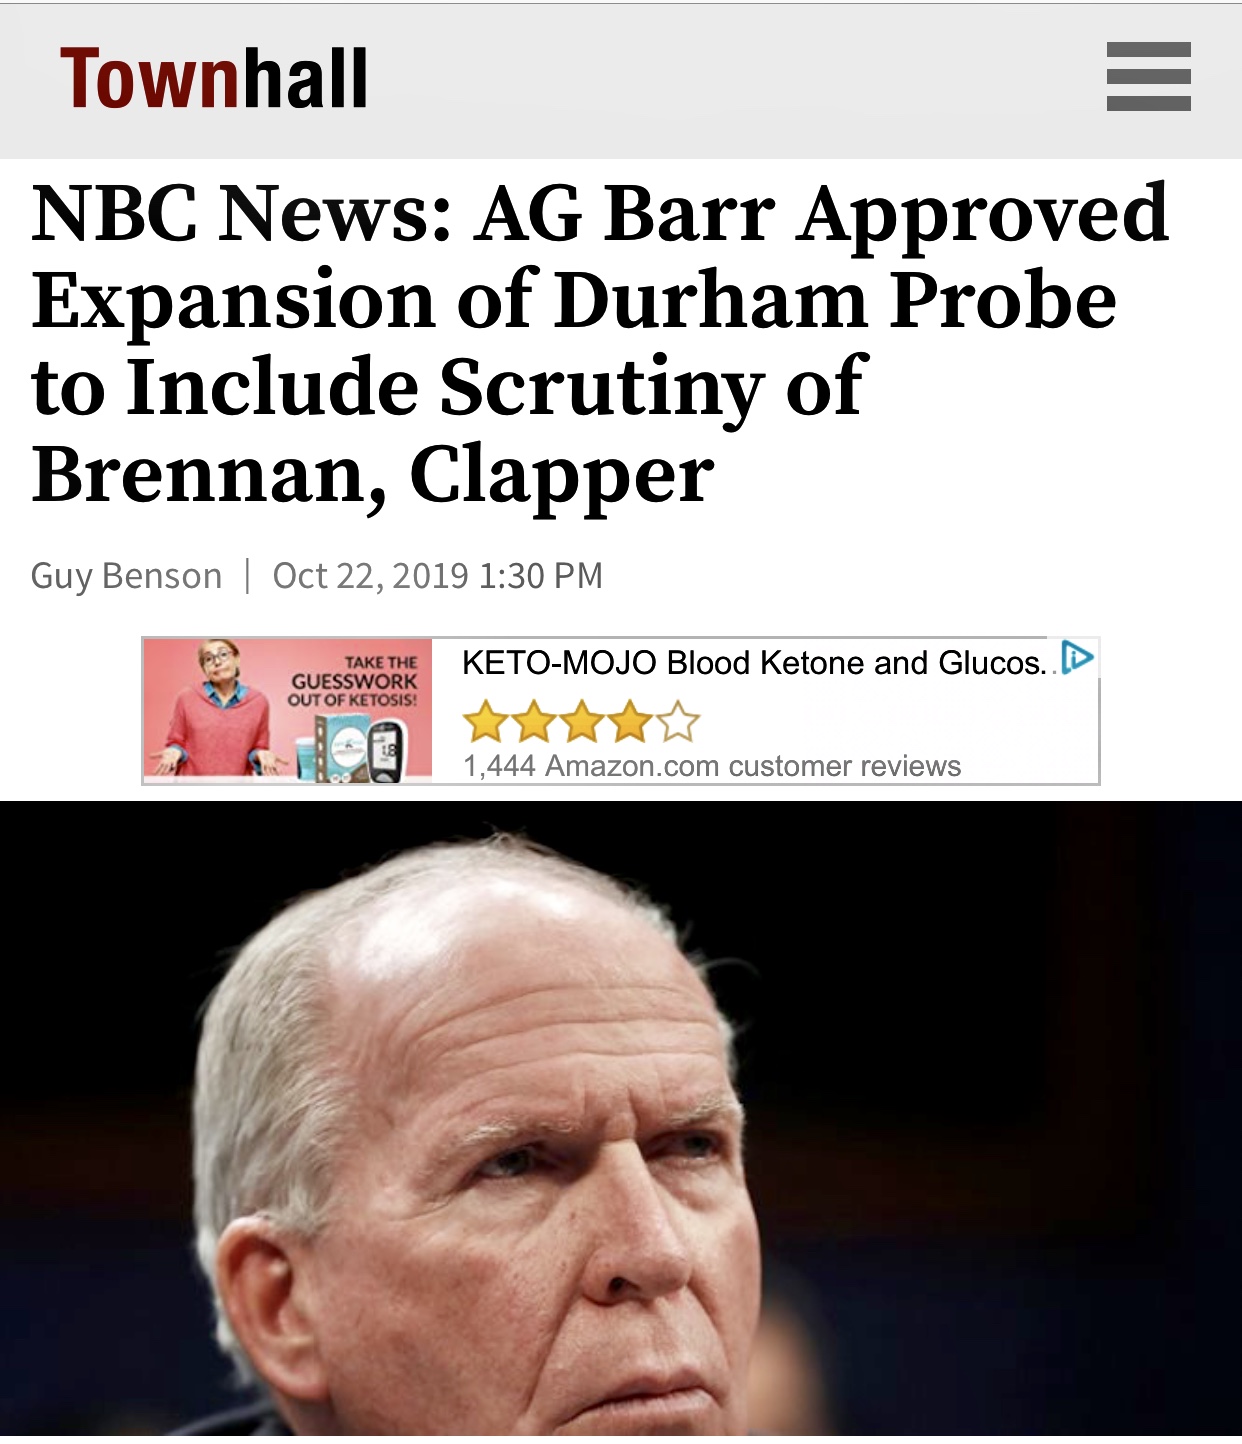 NBC News: AG Barr Approved Expansion of Durham Probe to Include Scrutiny of Brennan, Clapper